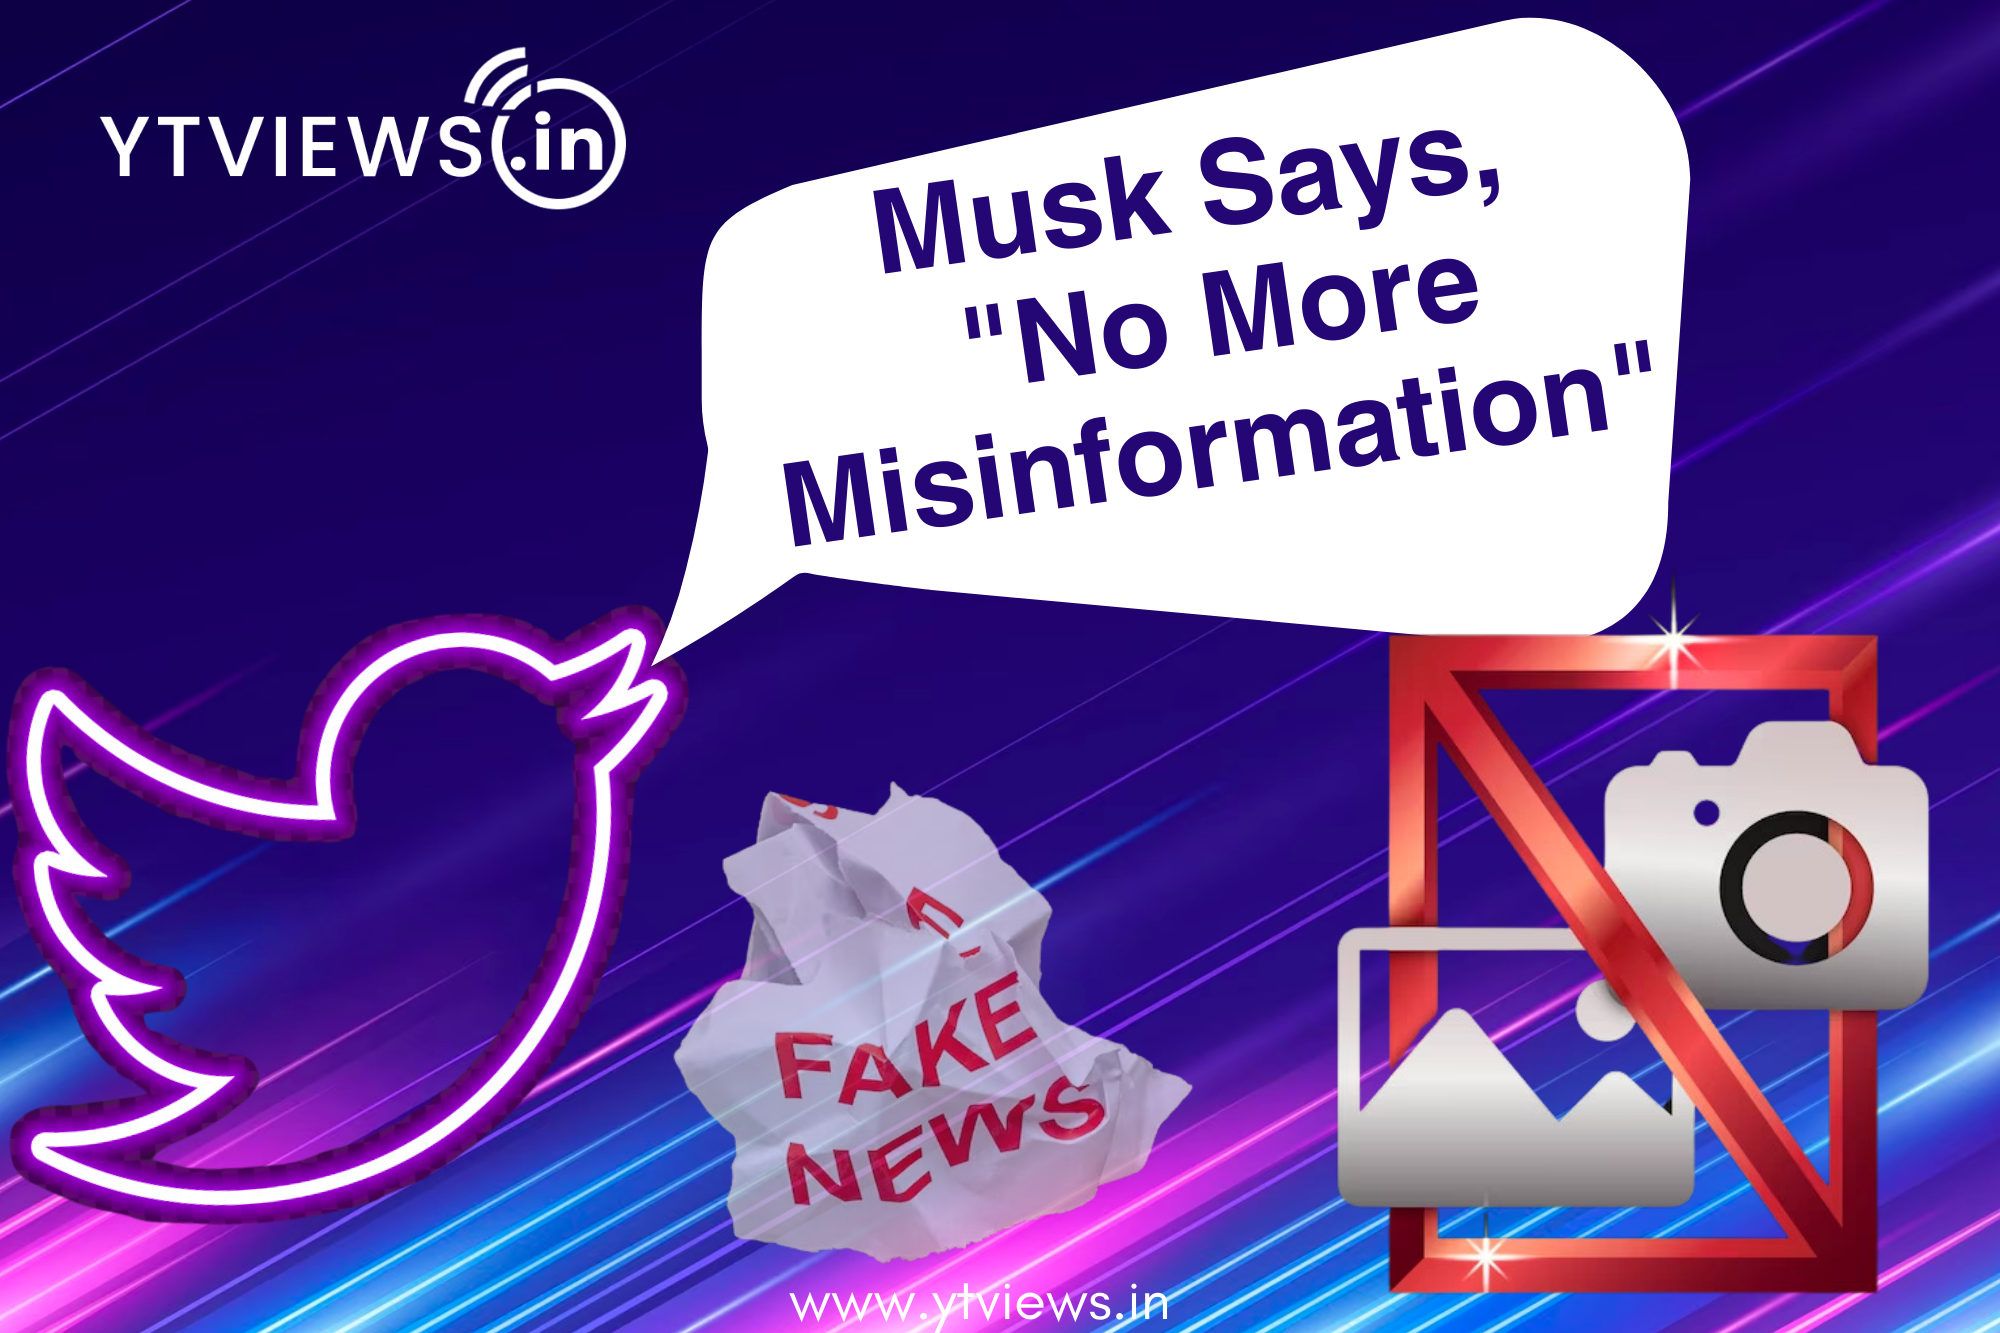 Elon Musk taking a huge step is stopping the spread of misinformation by introducing tools that detect misleading images